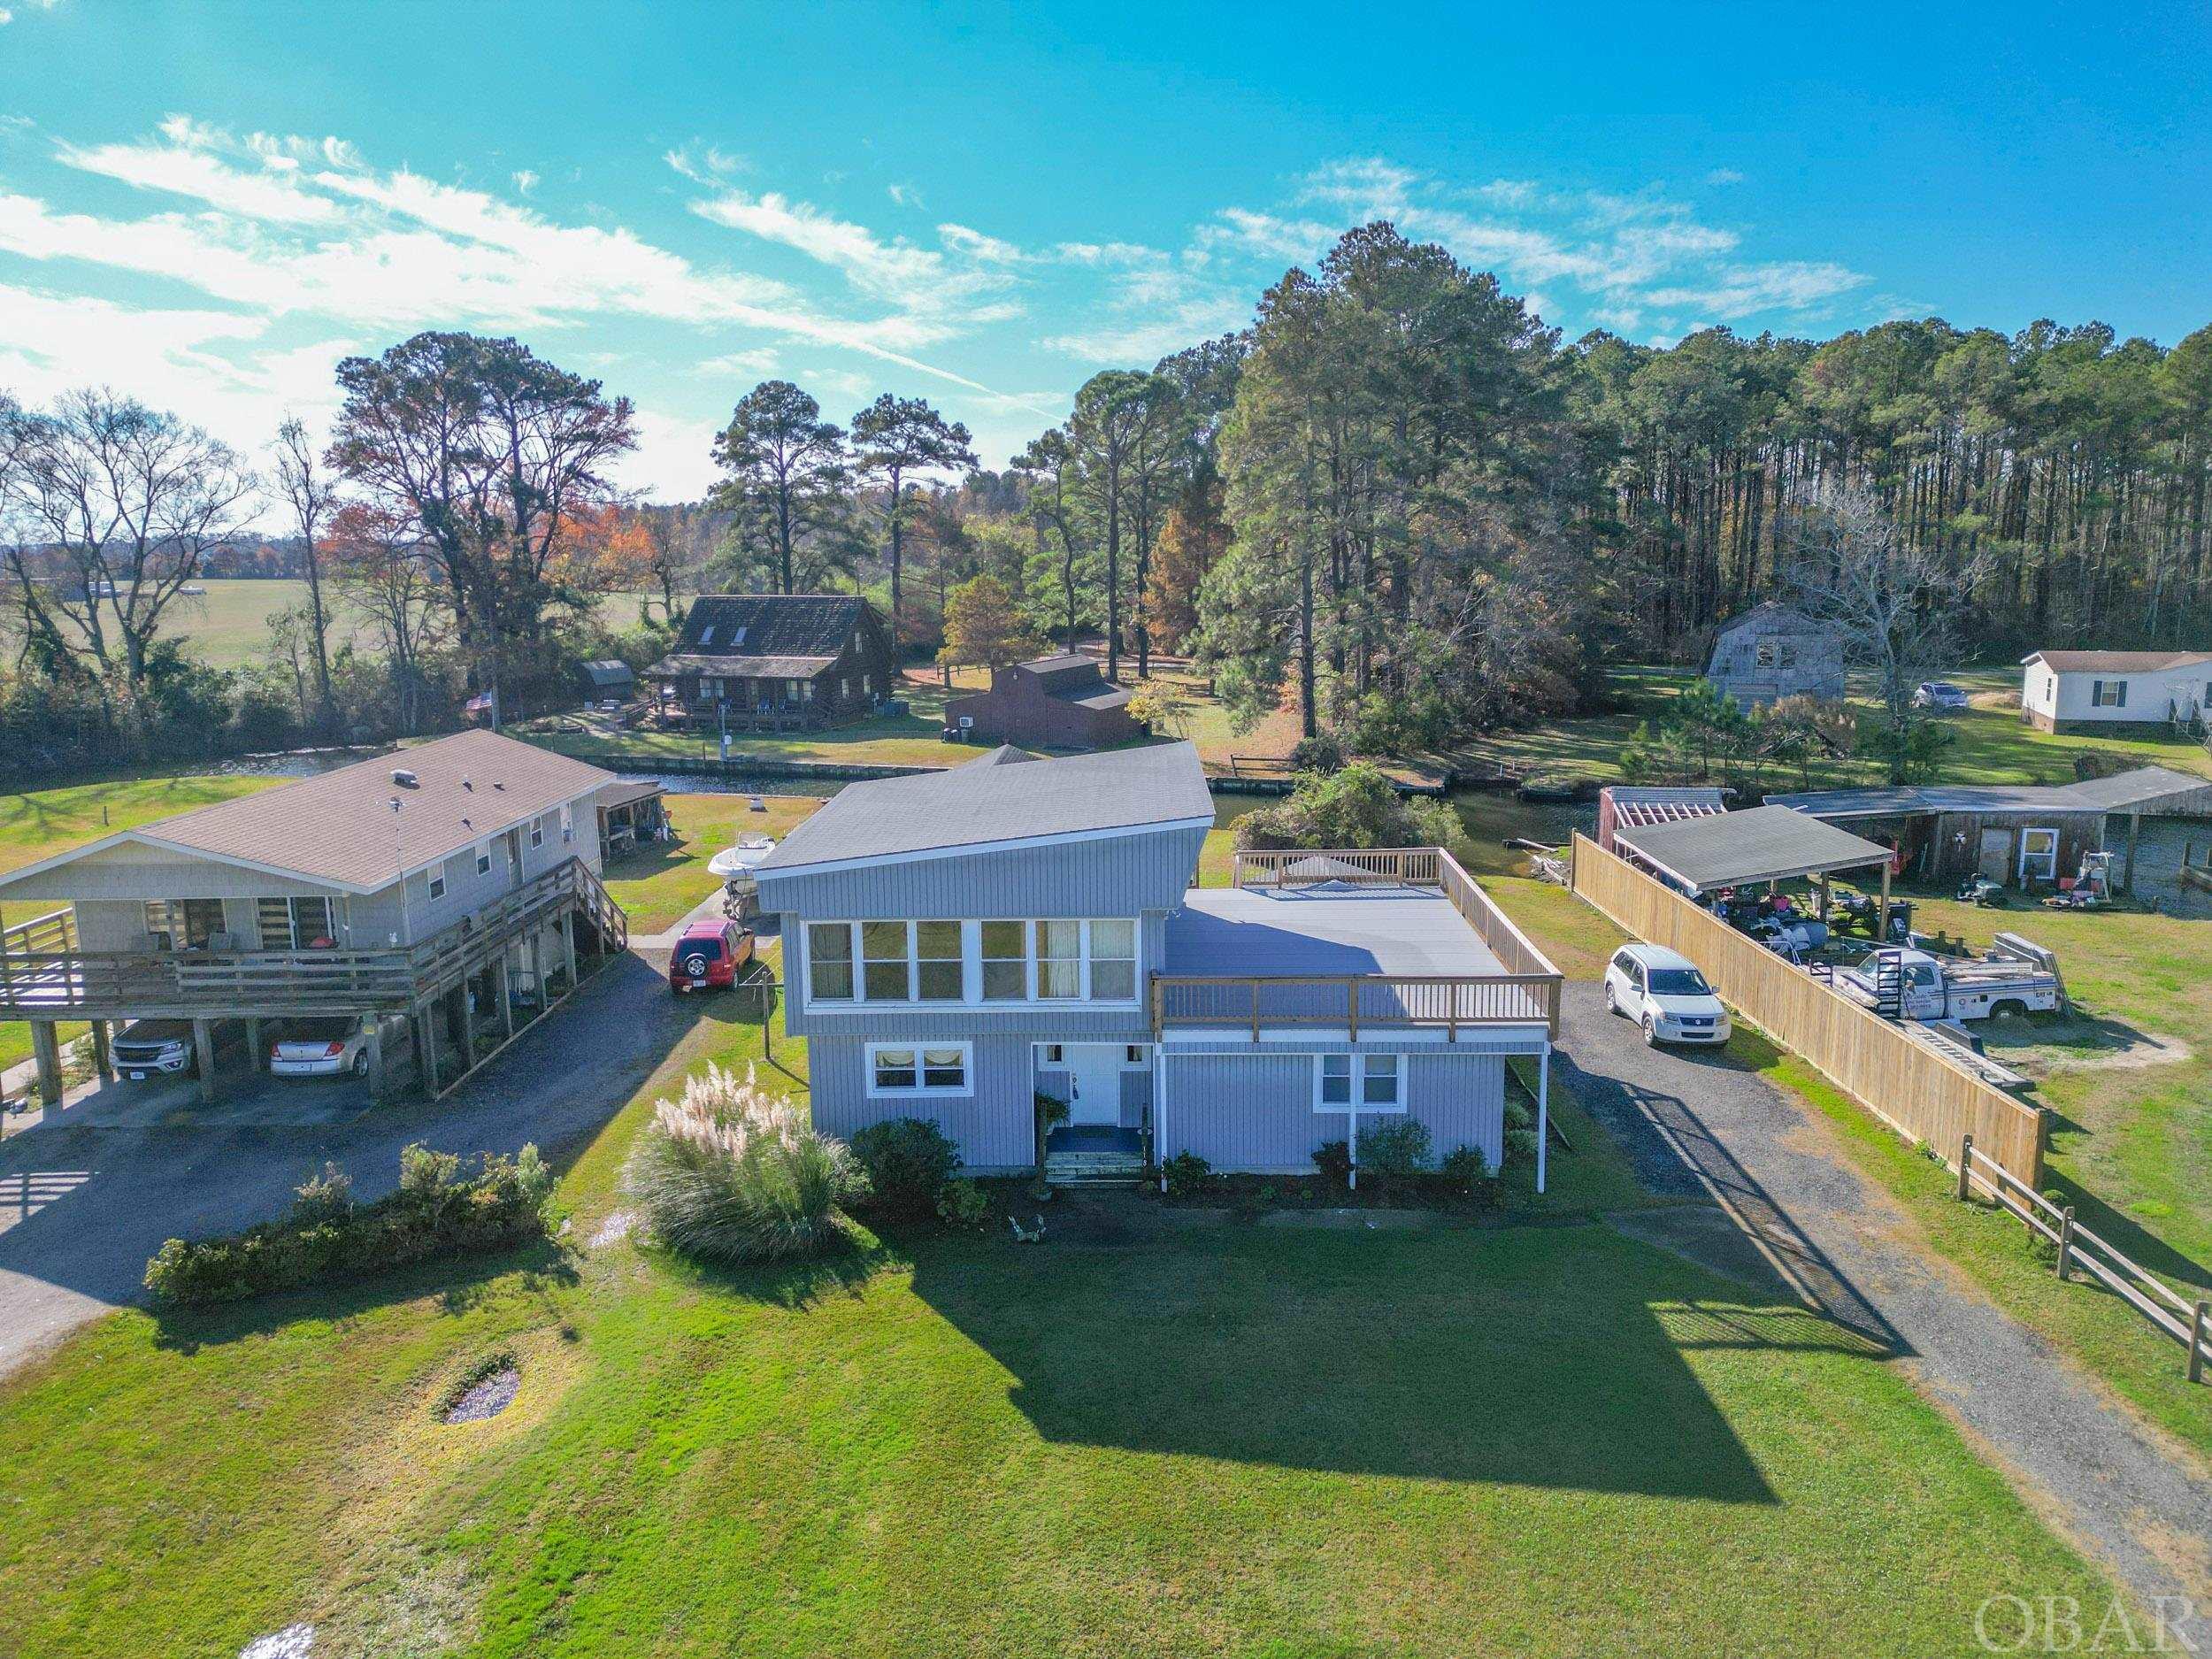 118 Womack Drive, Currituck, NC 27929, 3 Bedrooms Bedrooms, ,2 BathroomsBathrooms,Residential,For sale,Womack Drive,124568